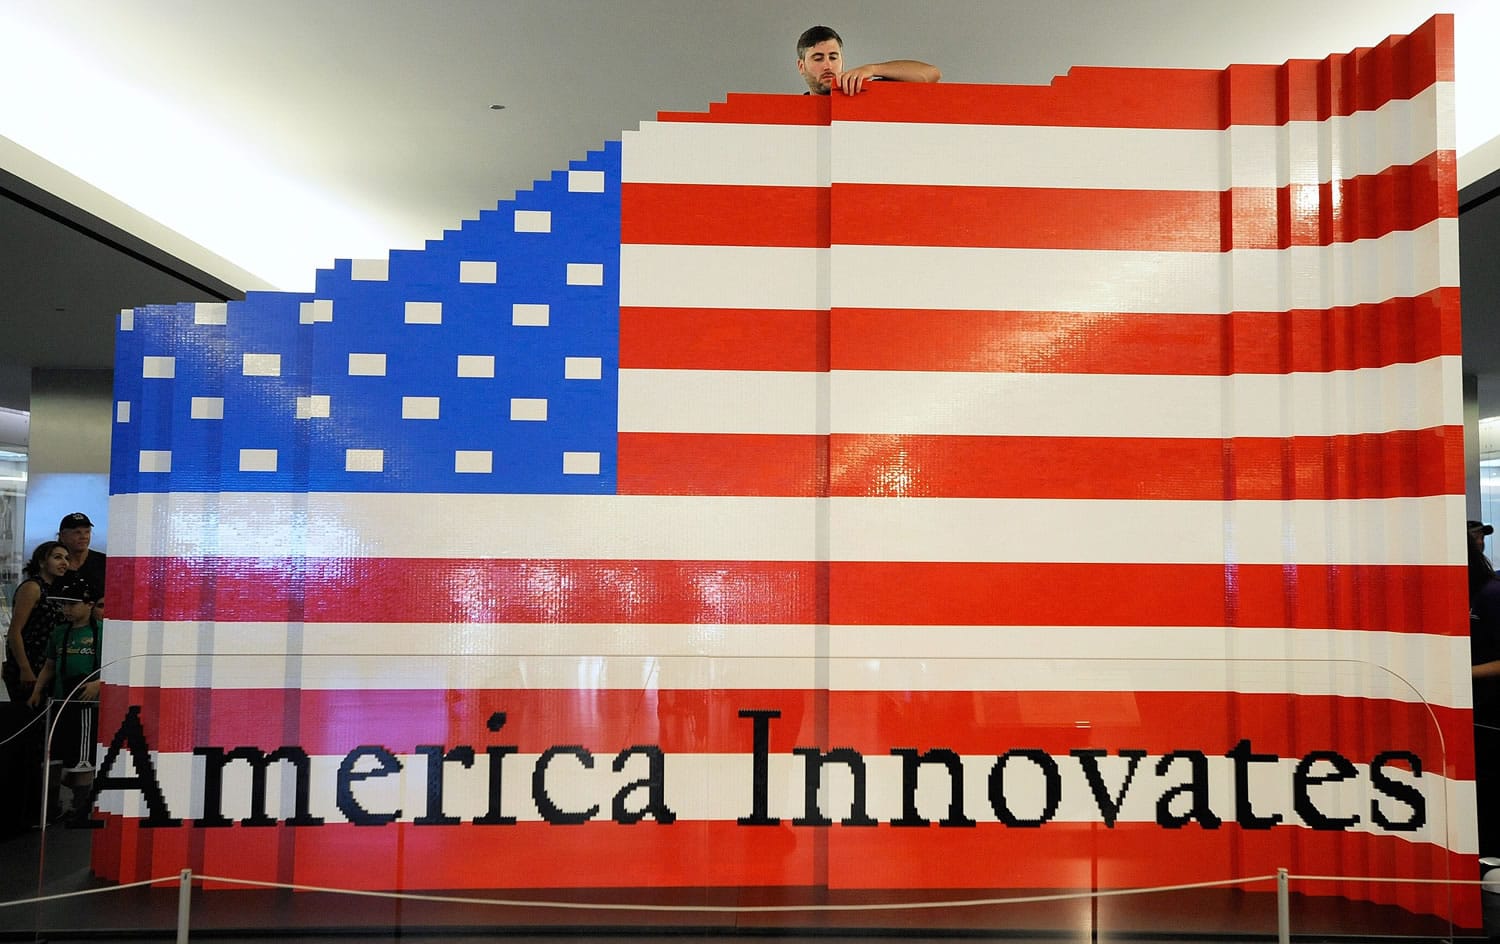 Lego master builder Chris Steininger, at top, places a brick while building the world's largest Lego American flag Wednesday at the National Museum of American History in Washington.